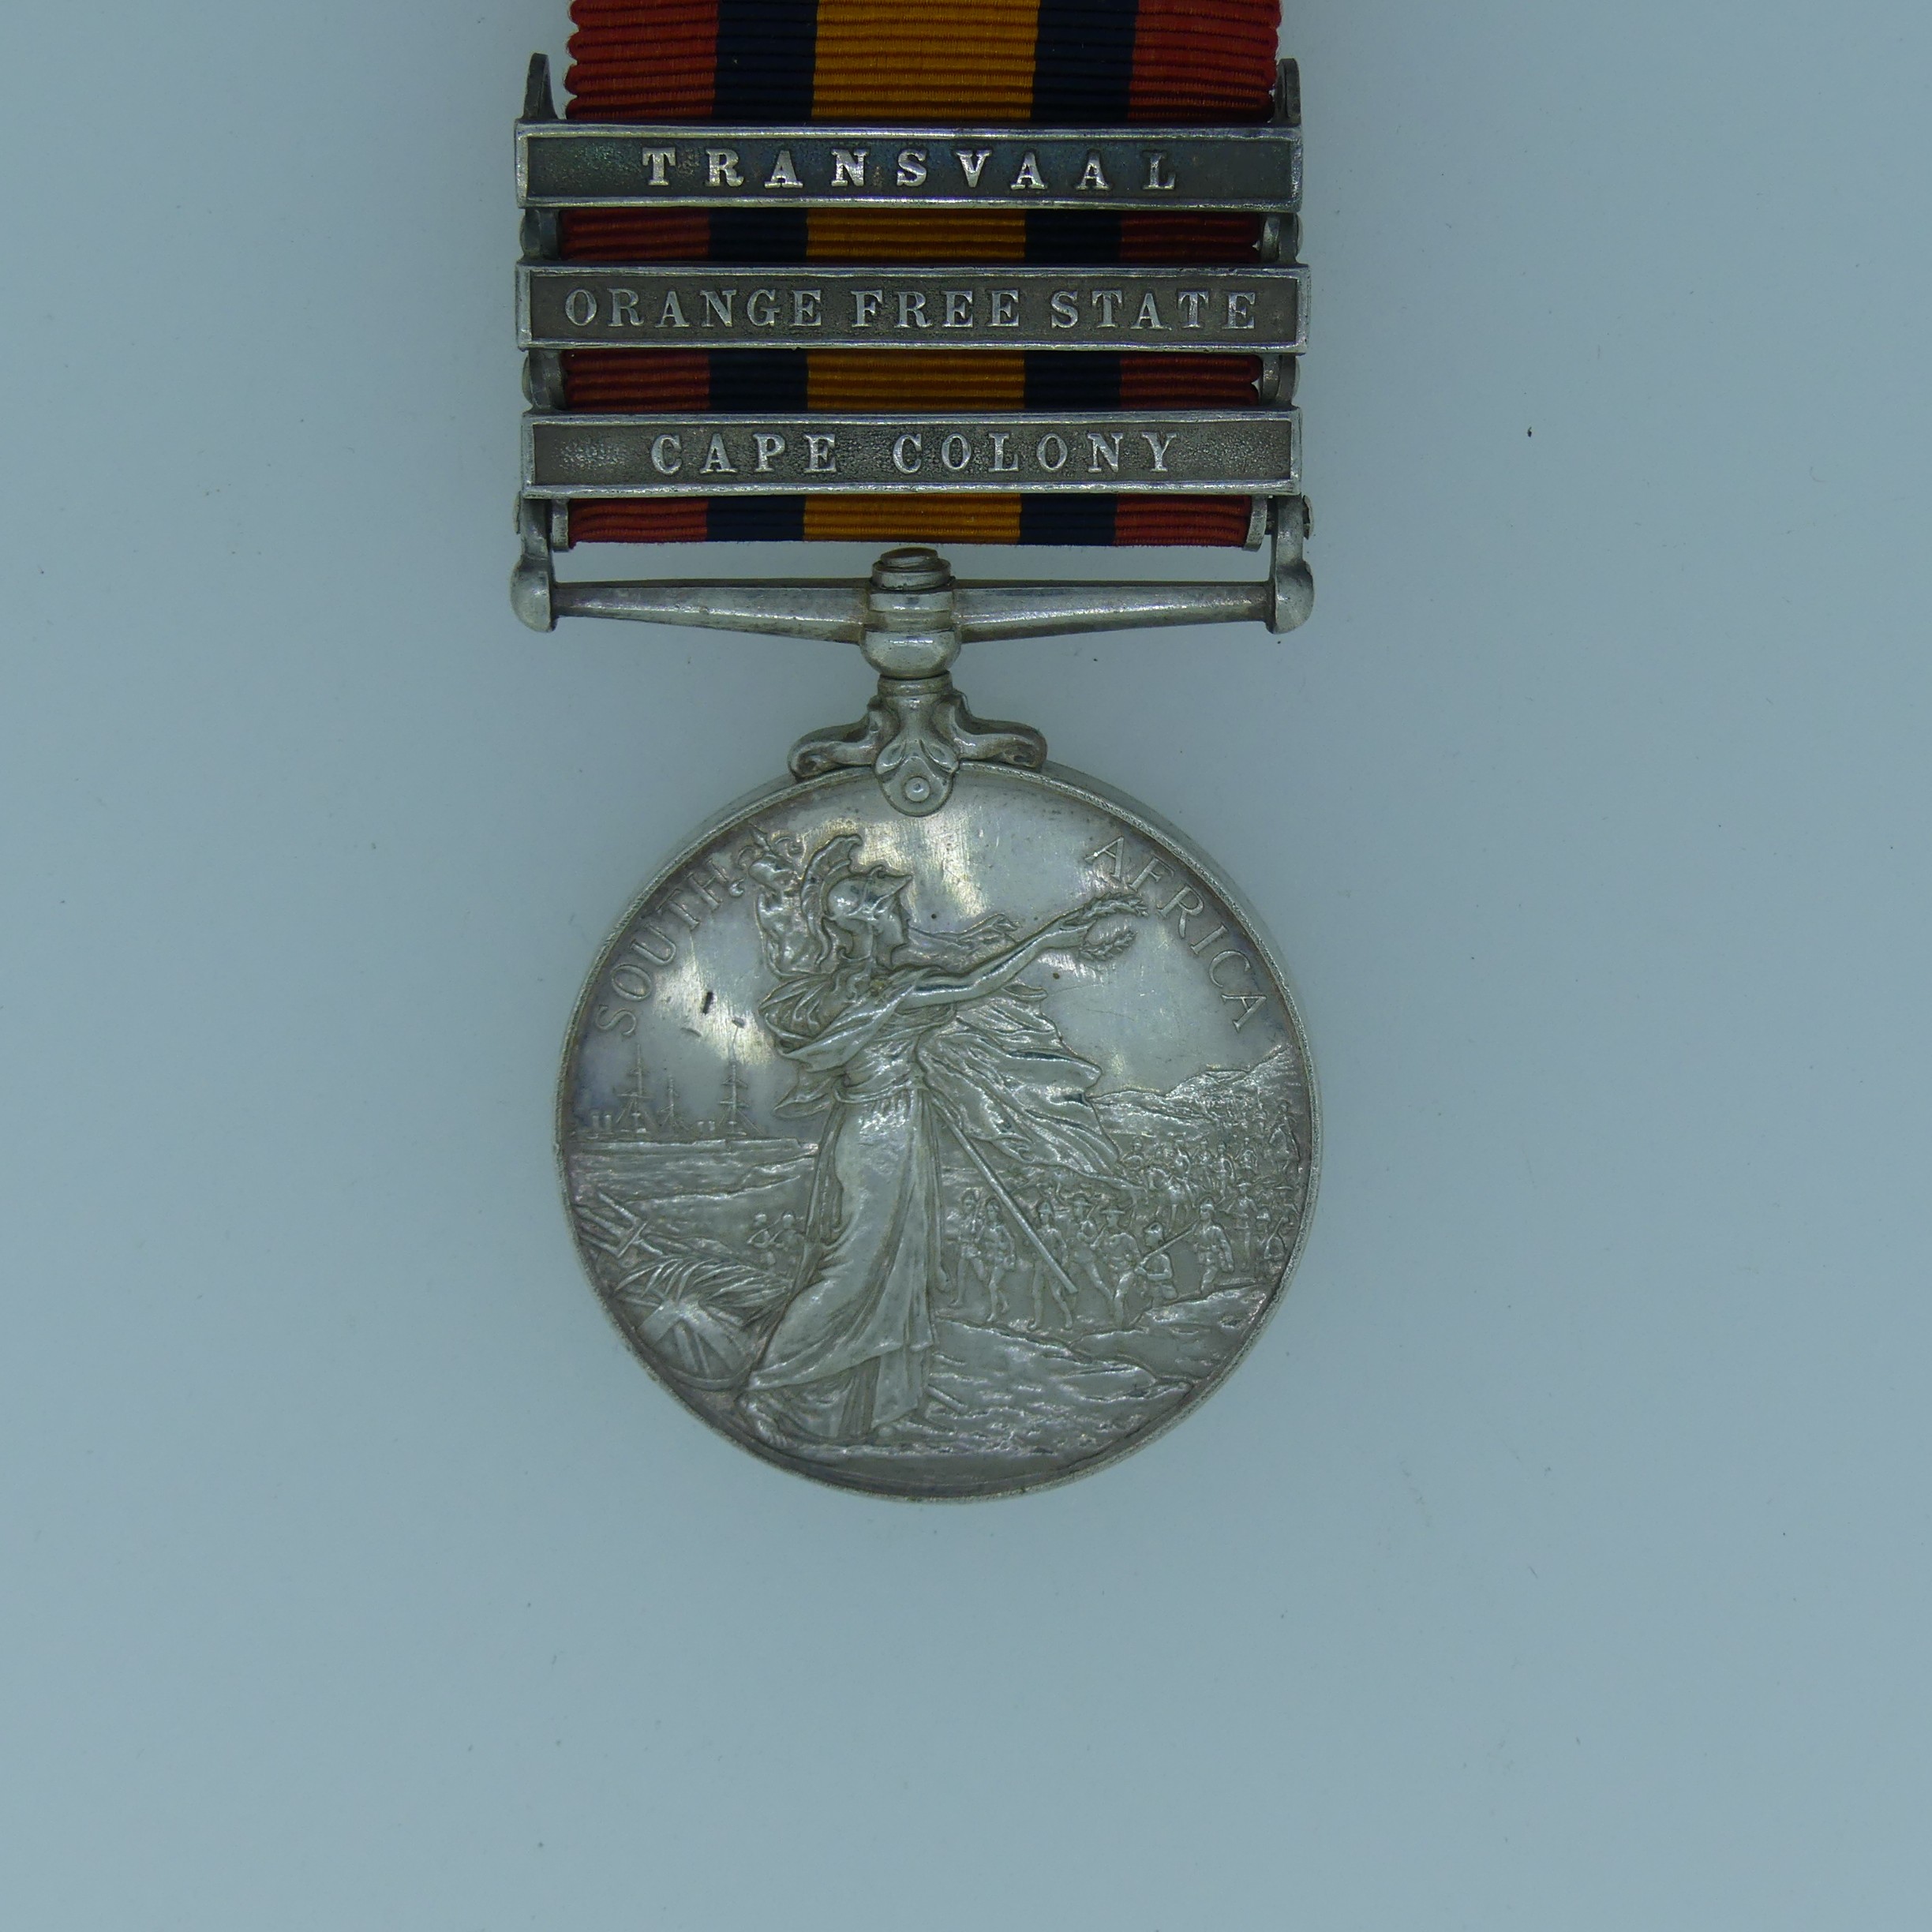 Queen's South Africa Medal (Three clasps: Transvaal, Orange Free State, Cape Colony) 6842 Pte T. - Image 2 of 5